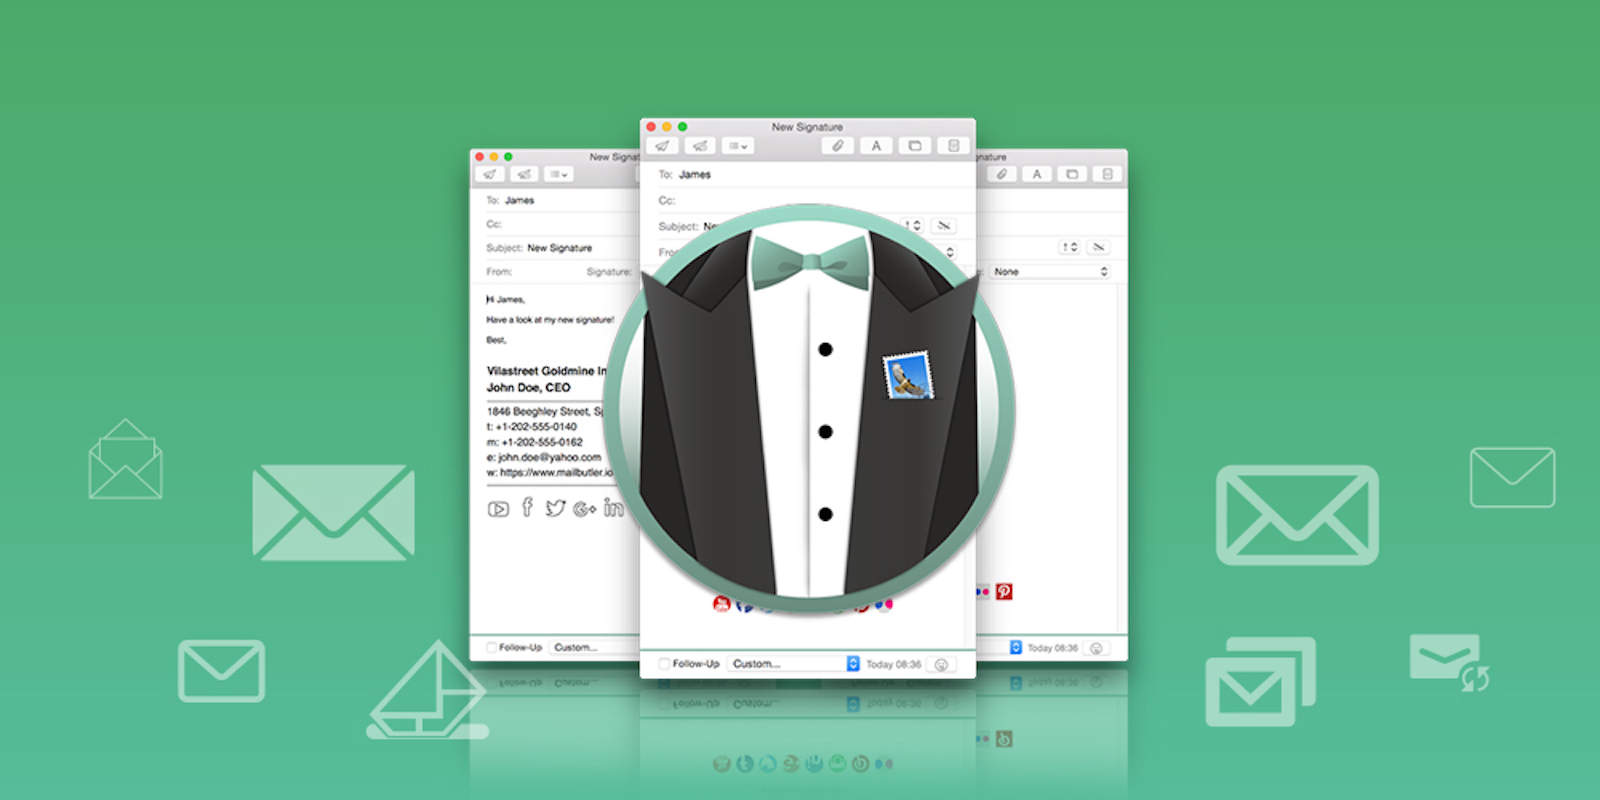 MailButler makes Apple Mail into the basis of a powerful task management assistant.